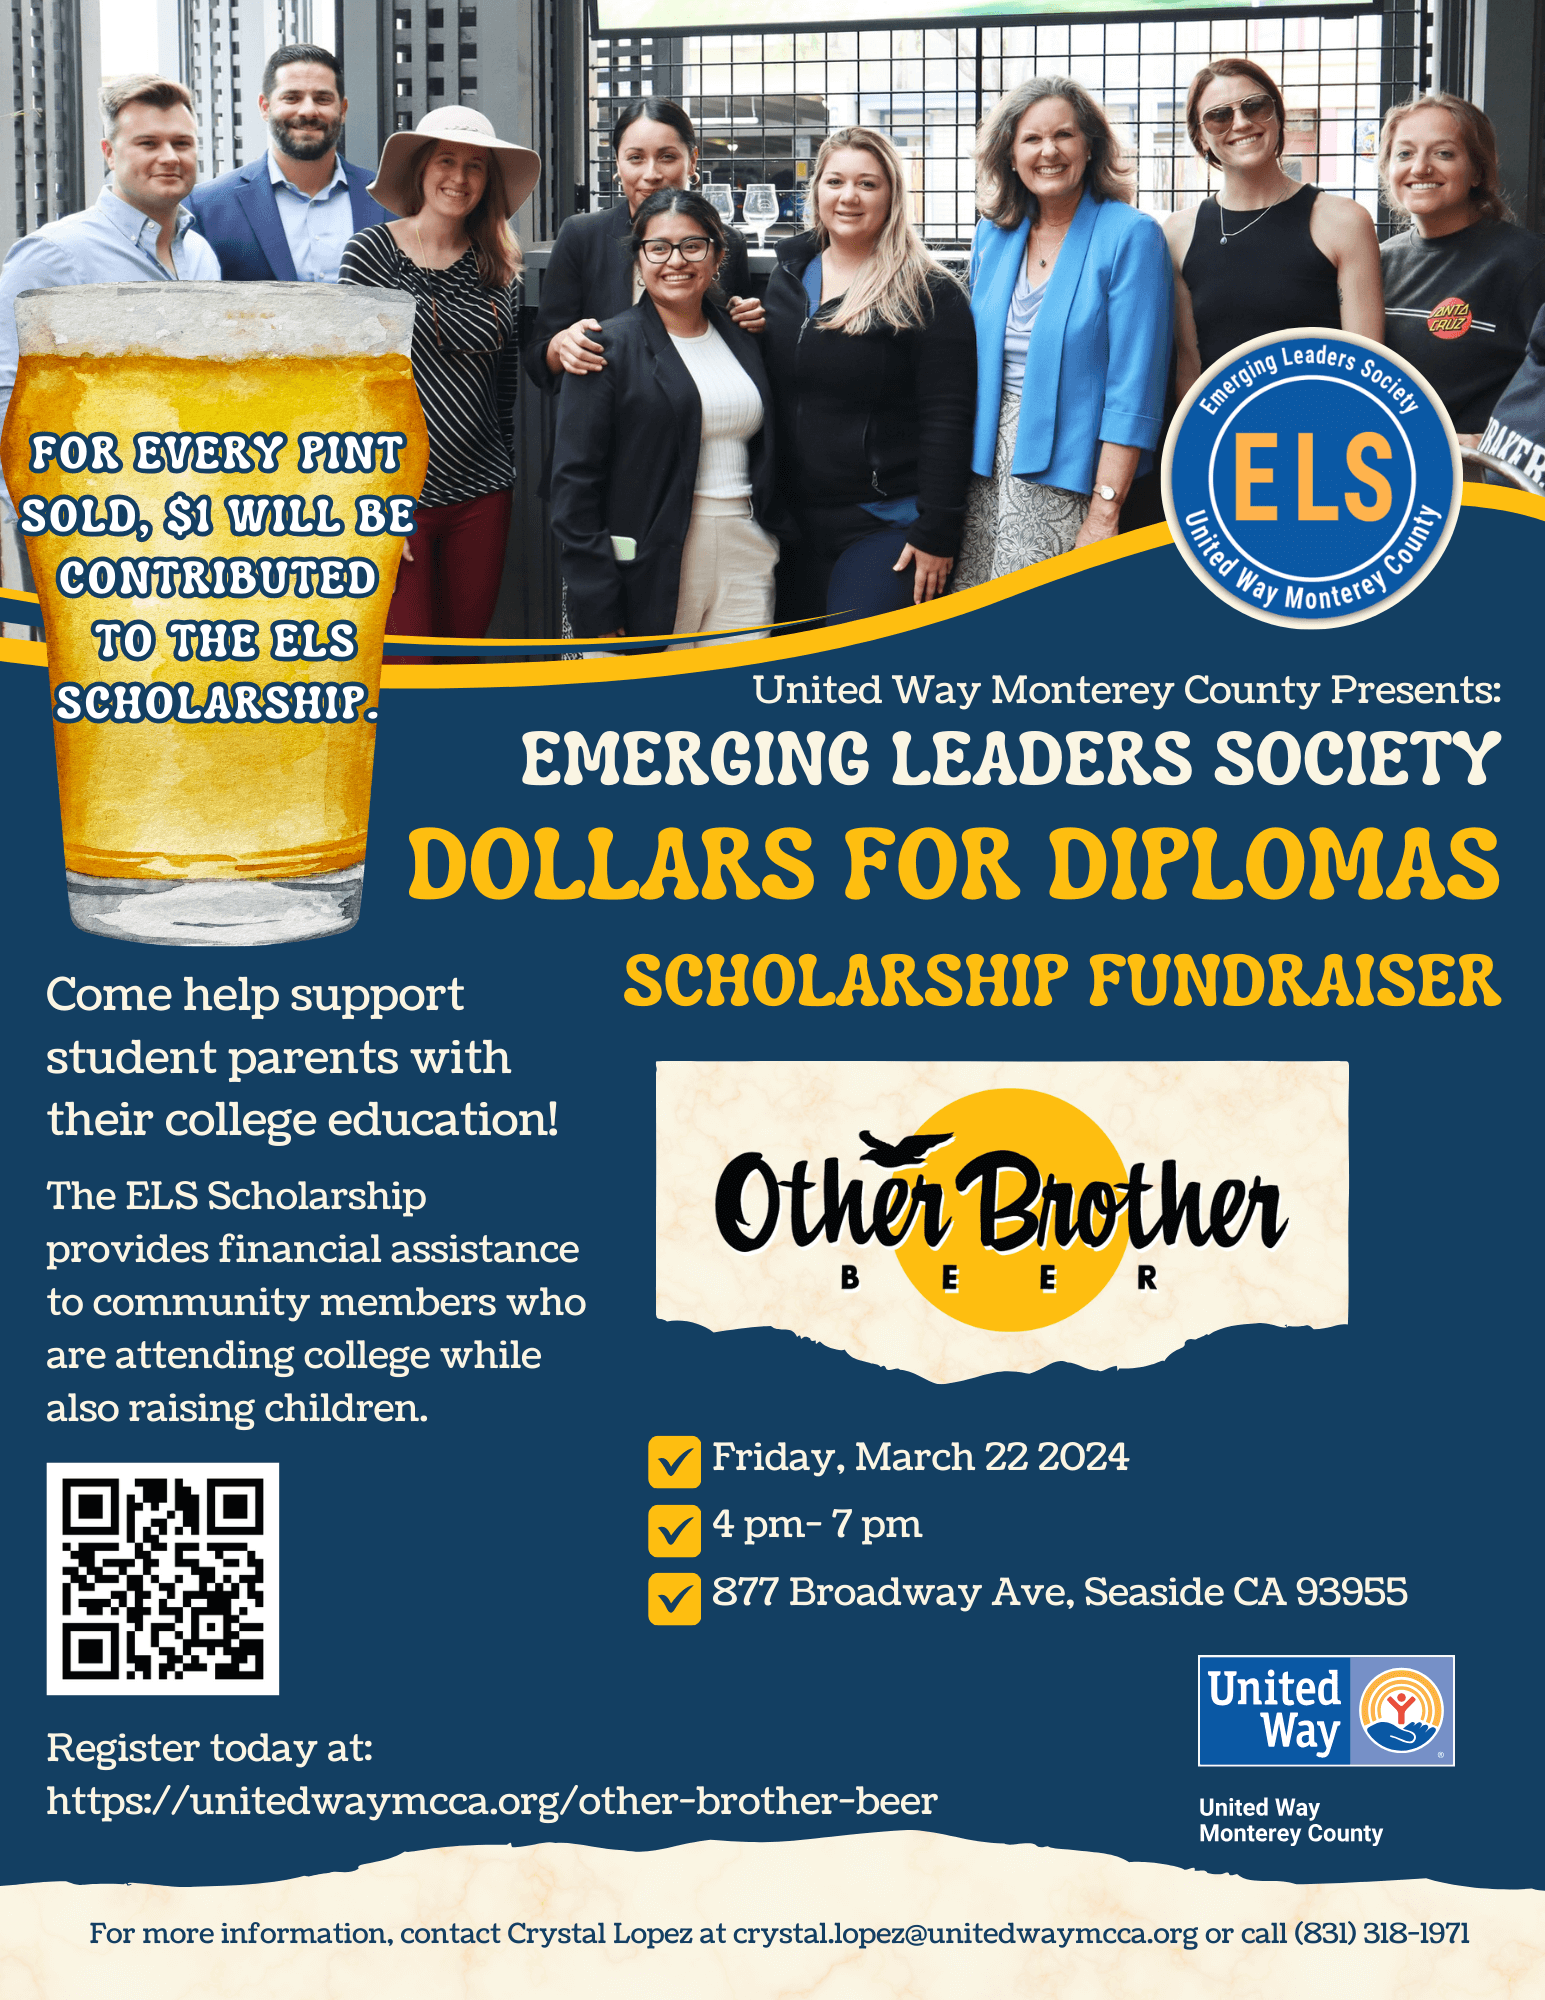 ELS Other Brother Beer Scholarship Fundraiser